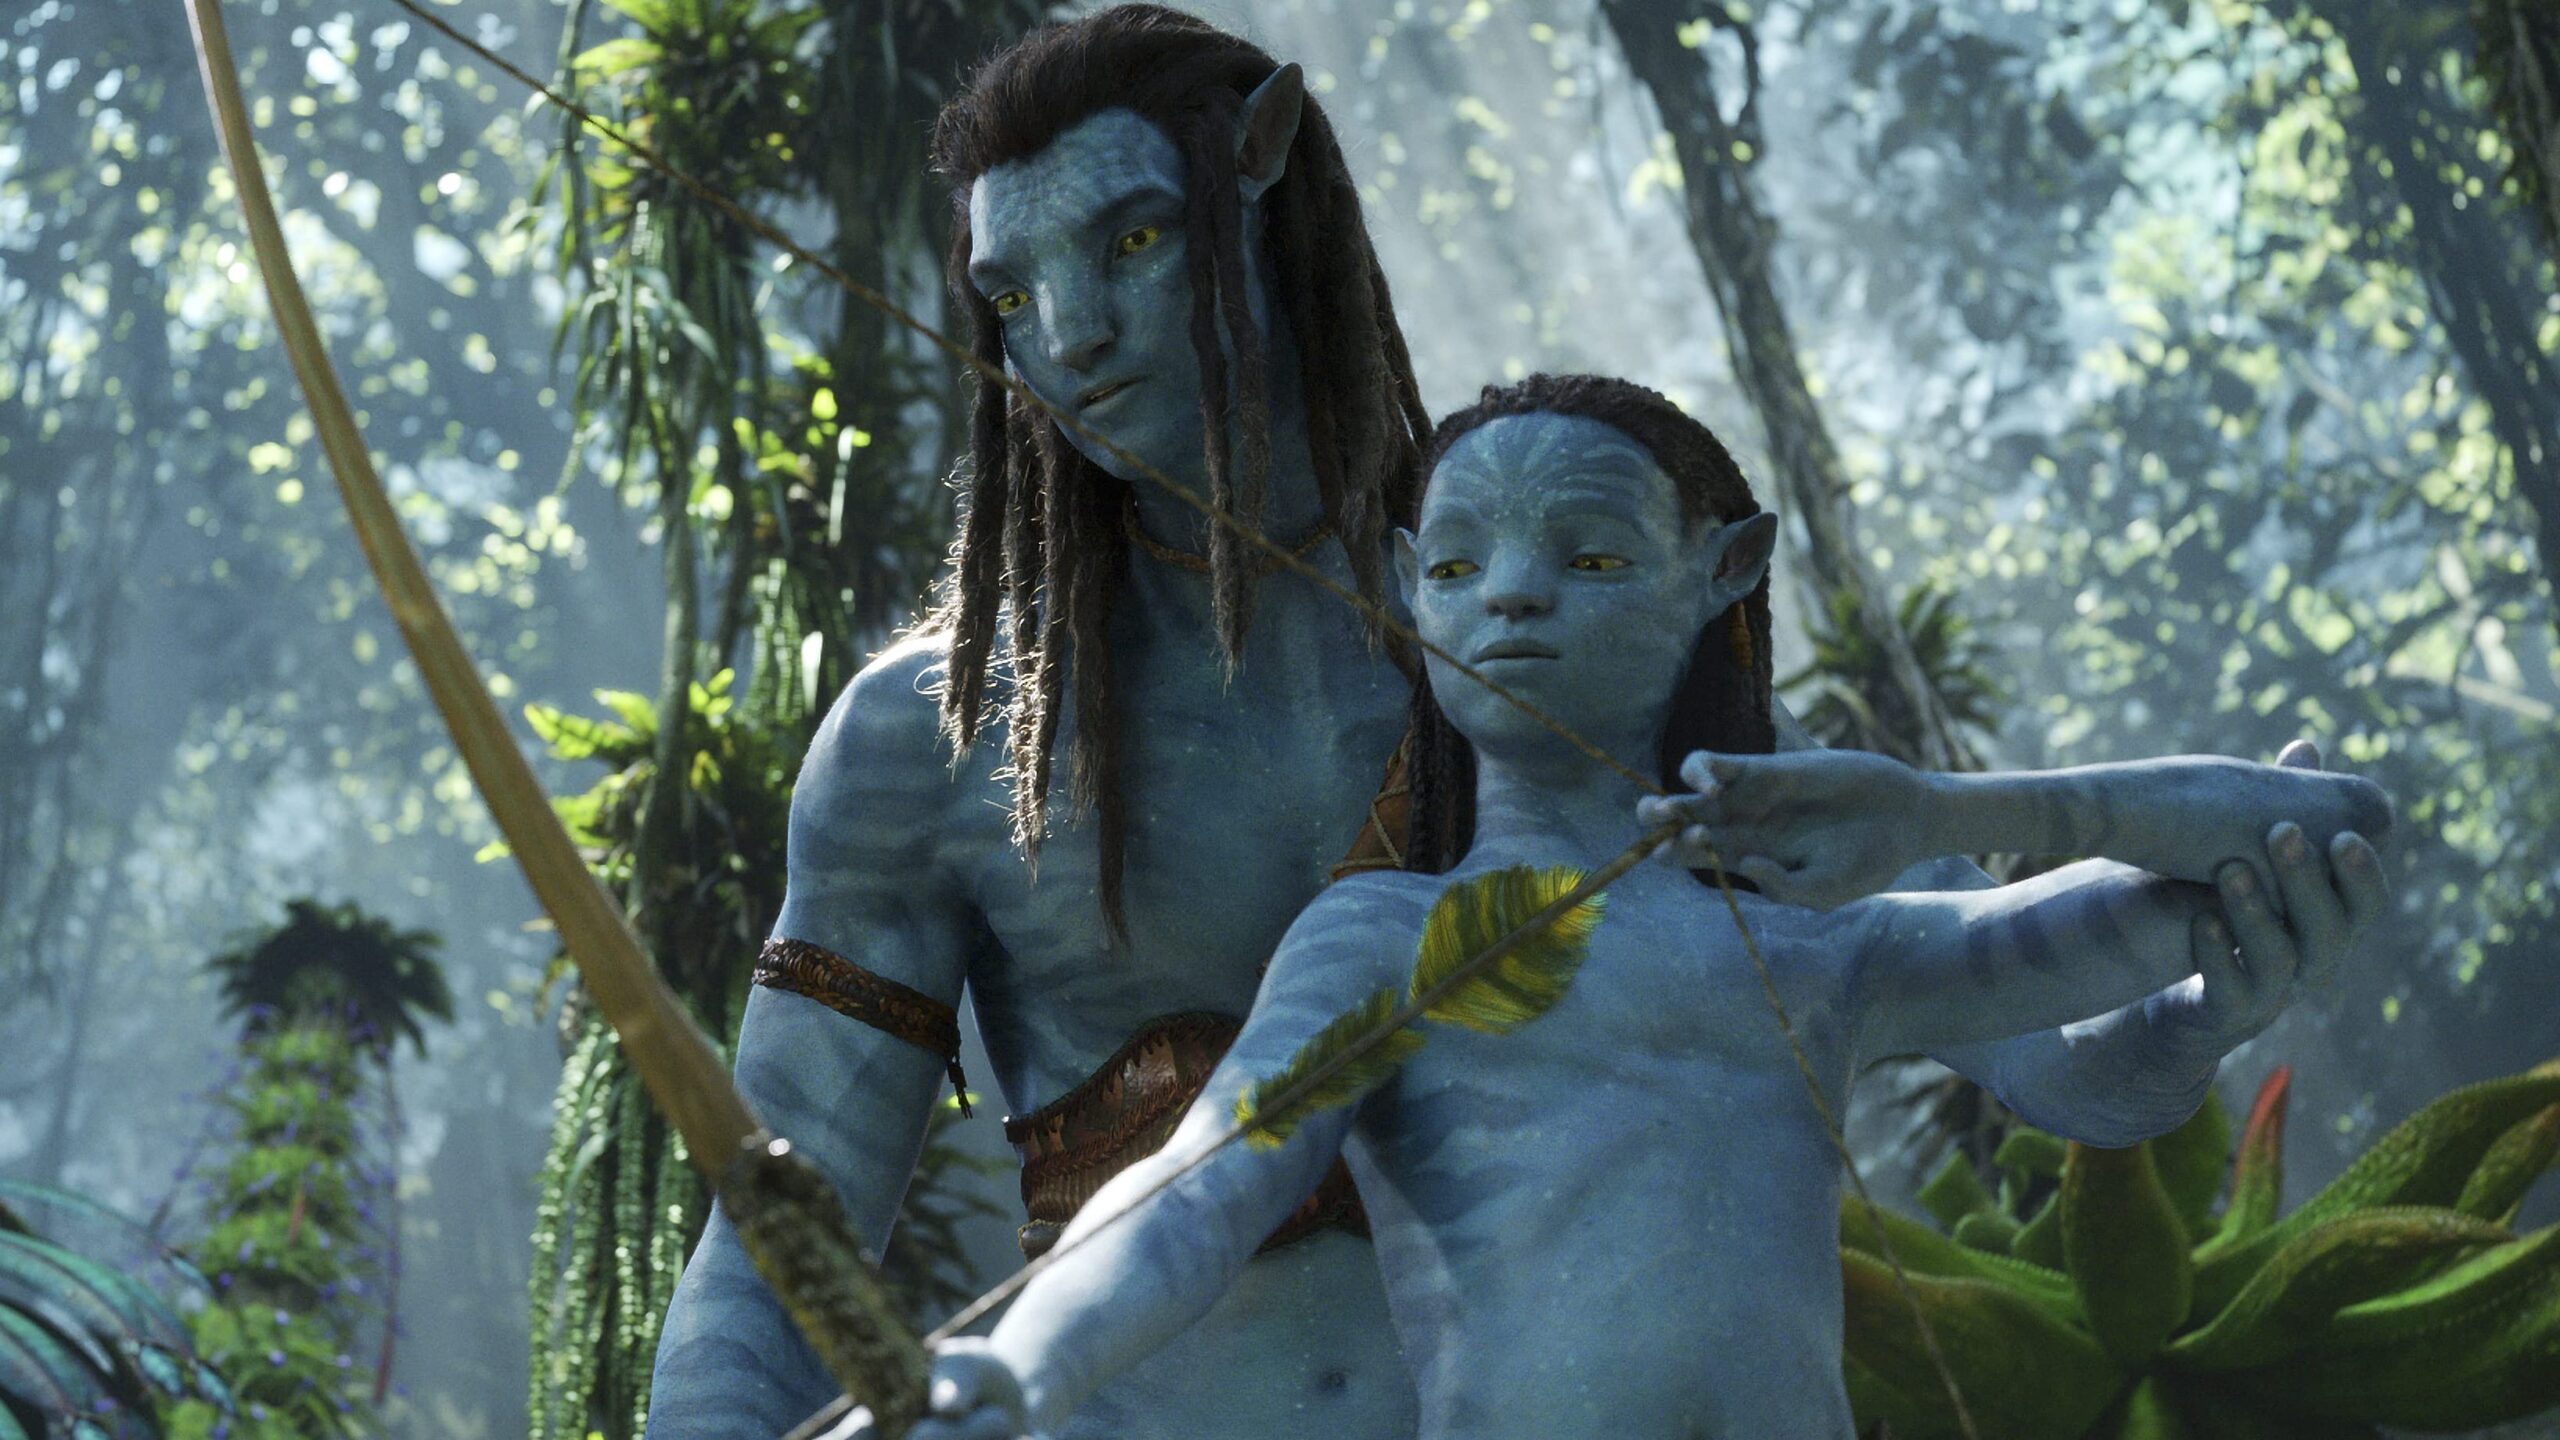 How To Watch Avatar 2 The Way of Water Online Streaming in Florida